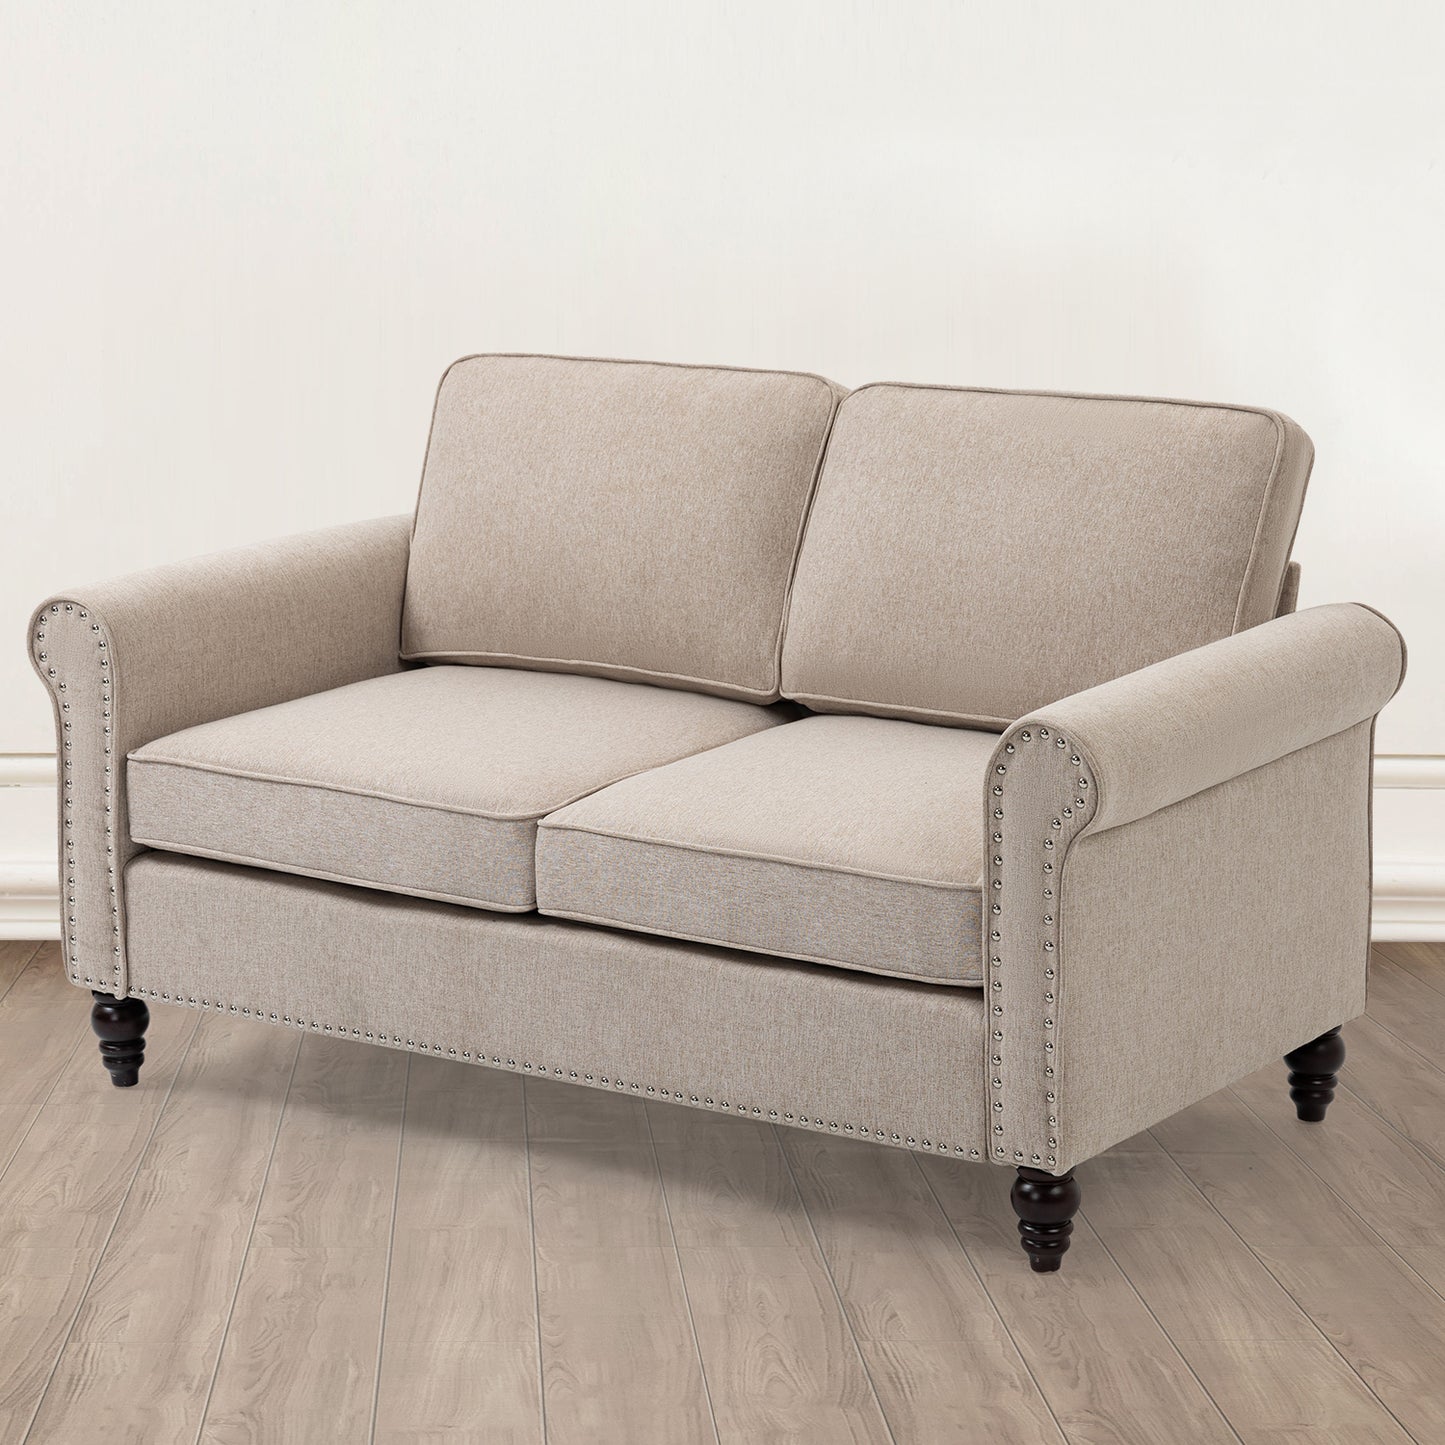 2-Seater Sofa, Button Tufted, Living Room Couch